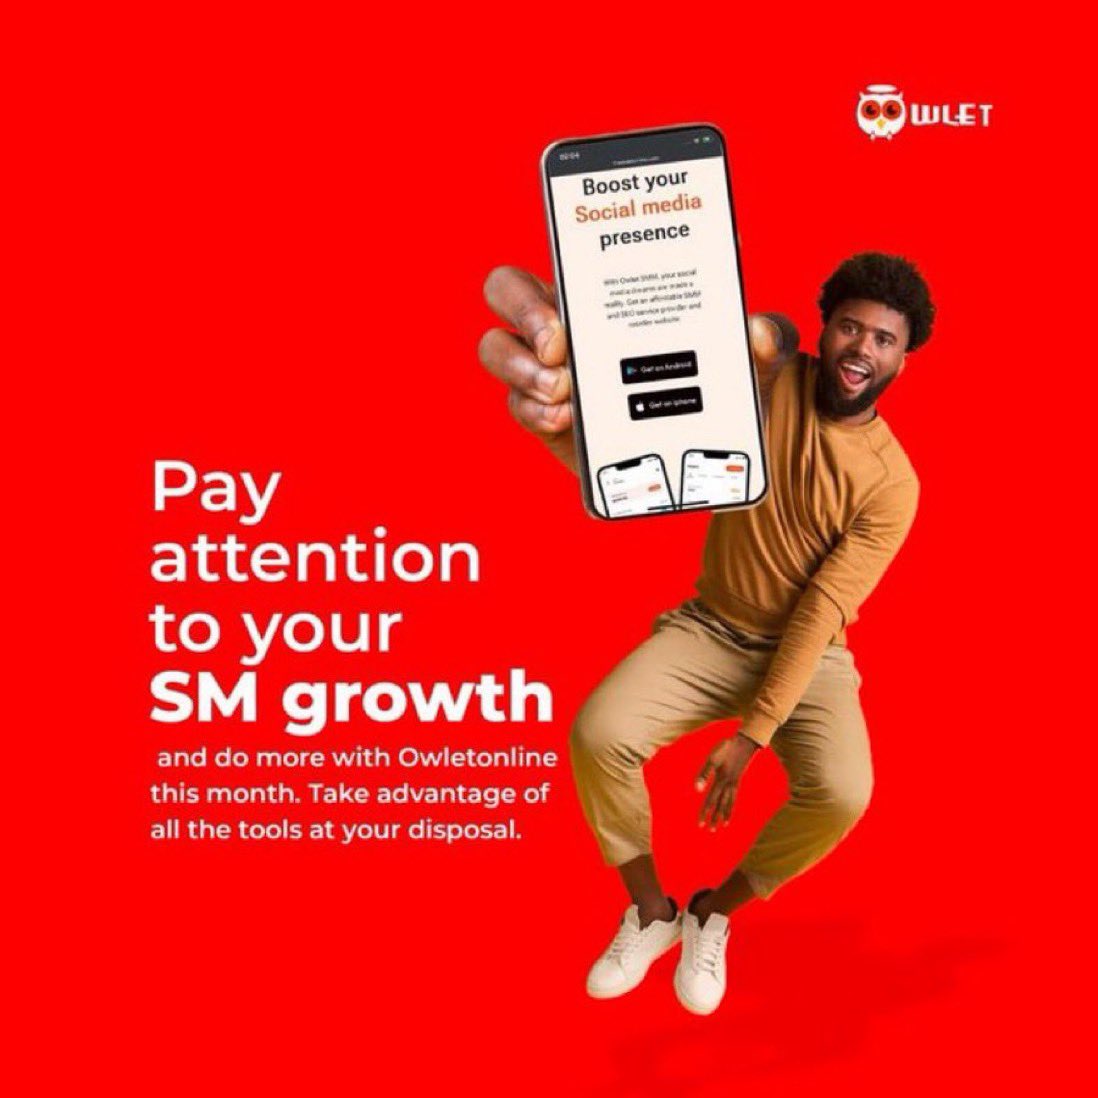 Now that Elon dey pay di33 all u need to do is to sign up on Owletpro.com and let them boost ur engagements on ur social media posts... #OwletBoostsYou